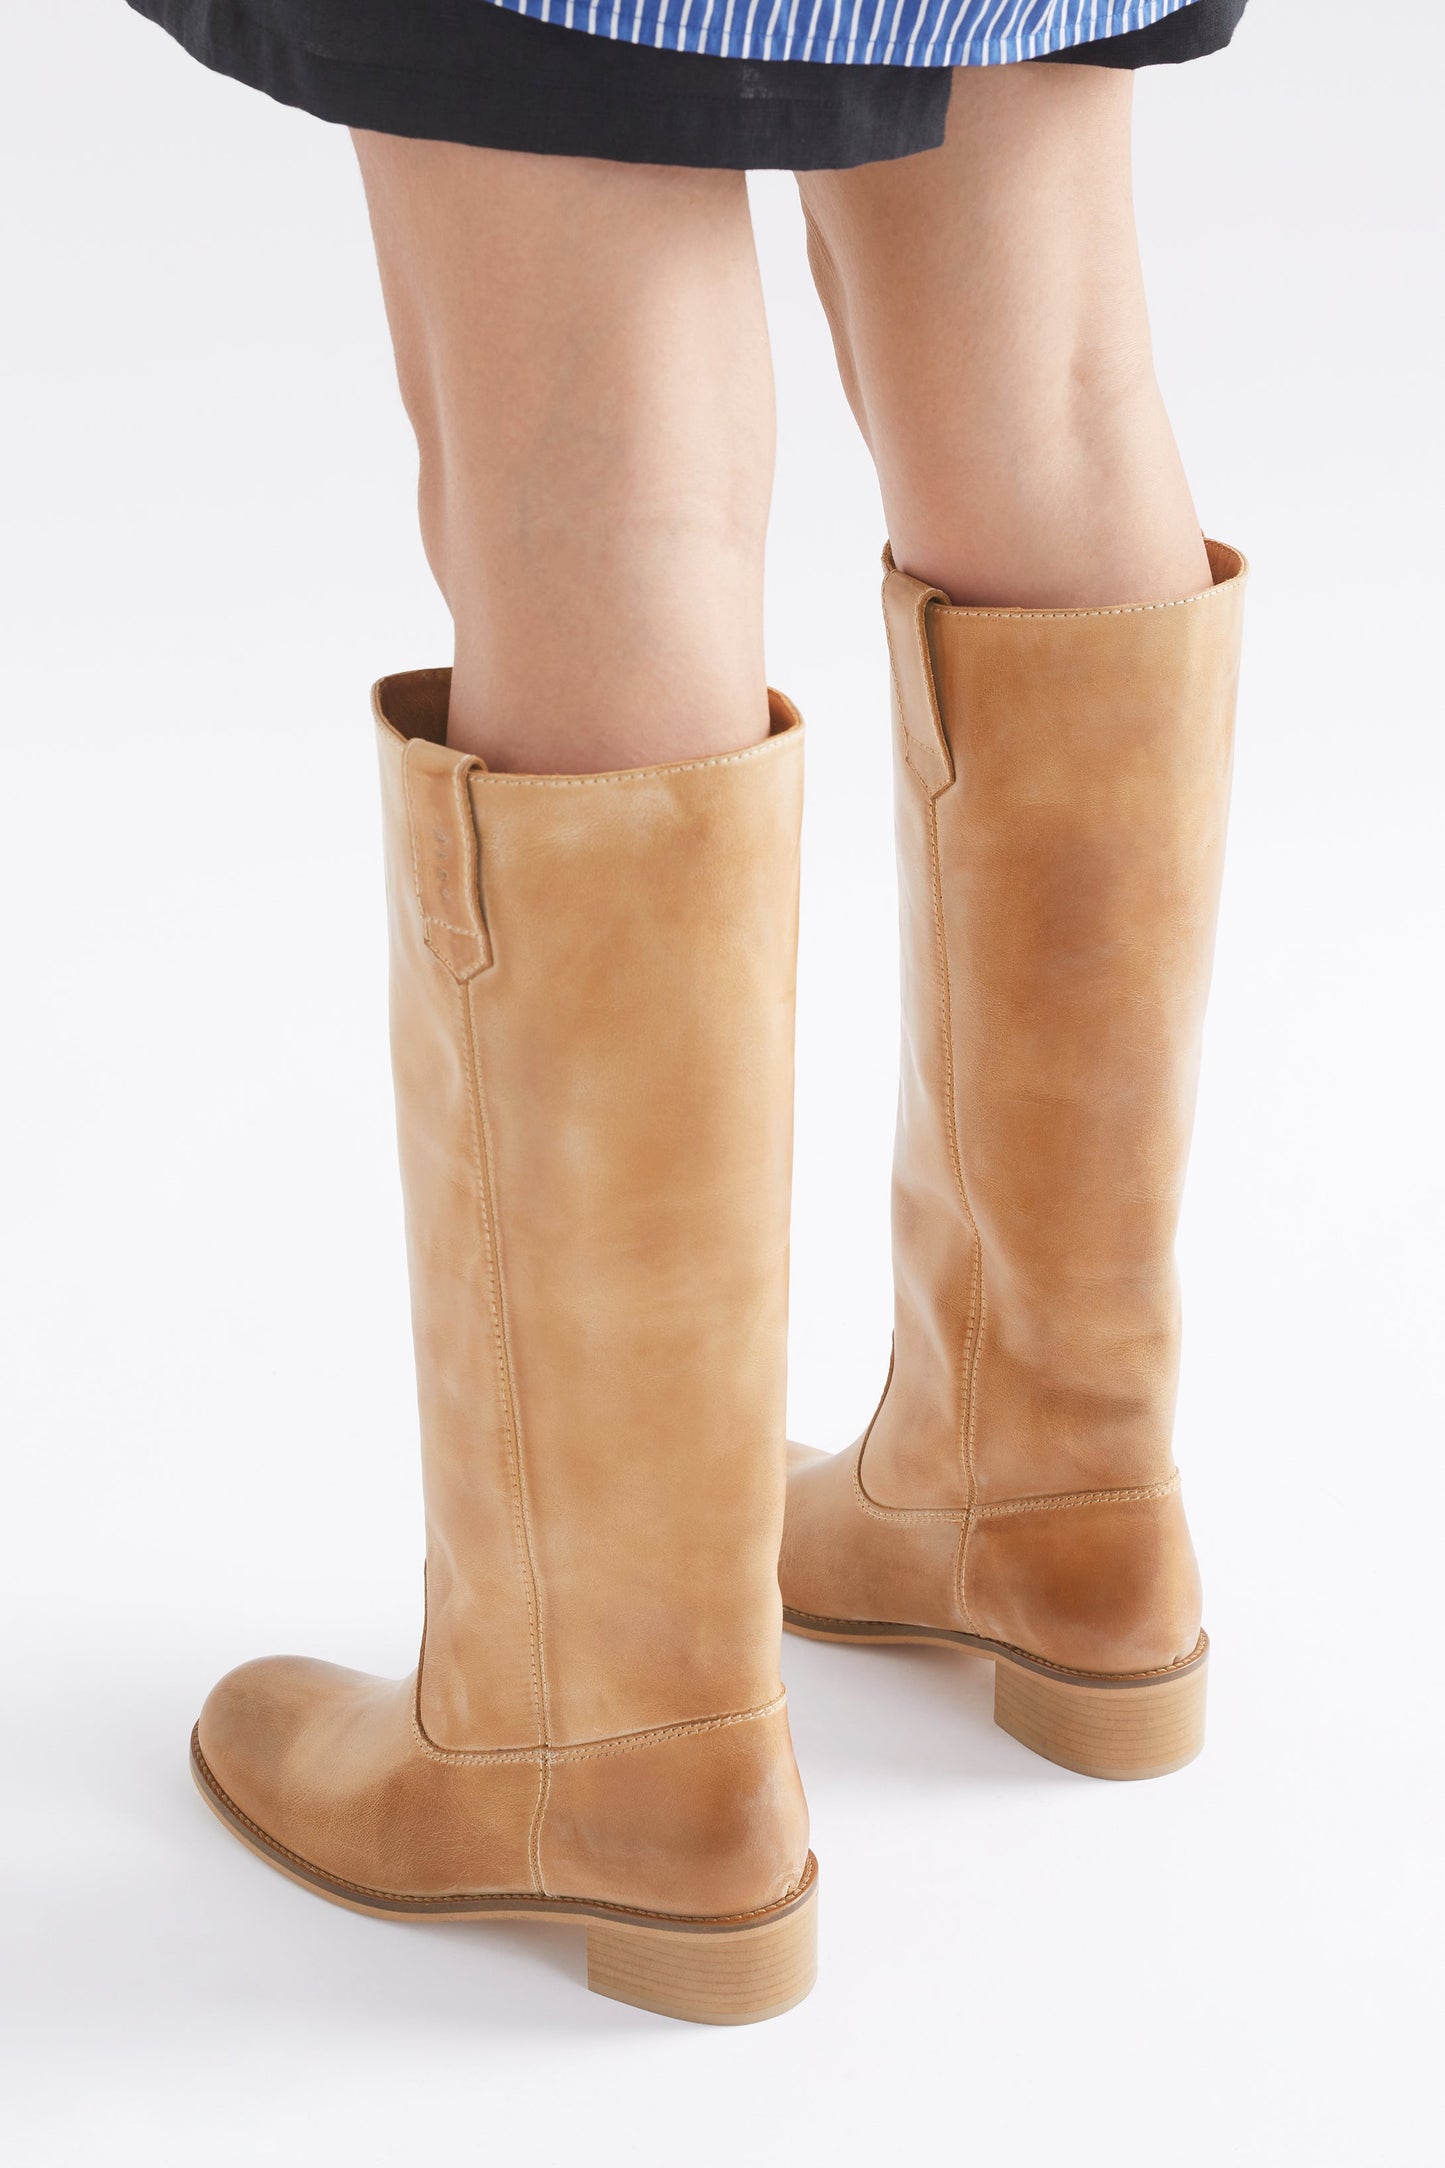 Anna Escovado Natural Worn Look Knee High Leather Boots Angled Back on Model | TAN